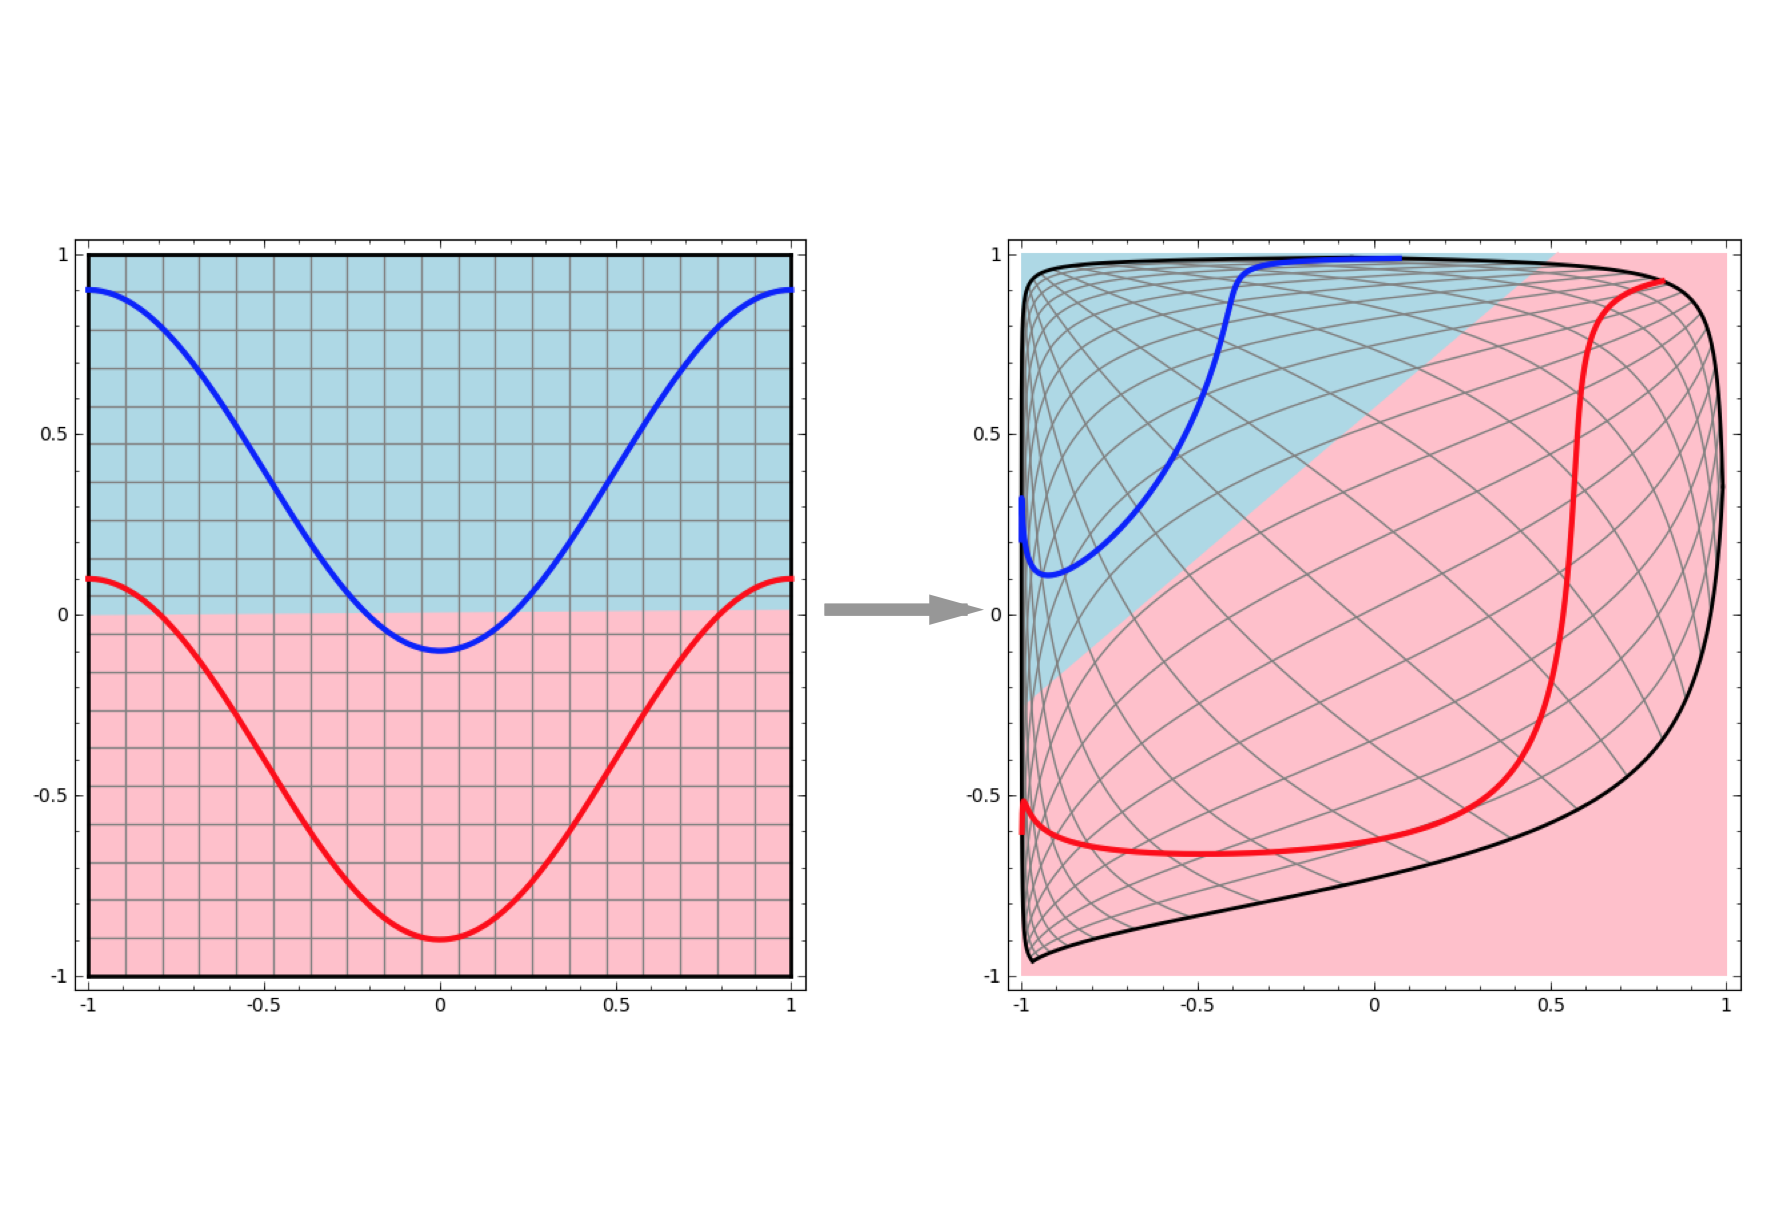 Example of how a neural network can, through a series of affine transformations followed by non-linear squashings, turn a linearly inseperable proble into a linearly seperable one. Image courtesy of [Chris Olah's blog](http://colah.github.io/posts/2014-03-NN-Manifolds-Topology/)